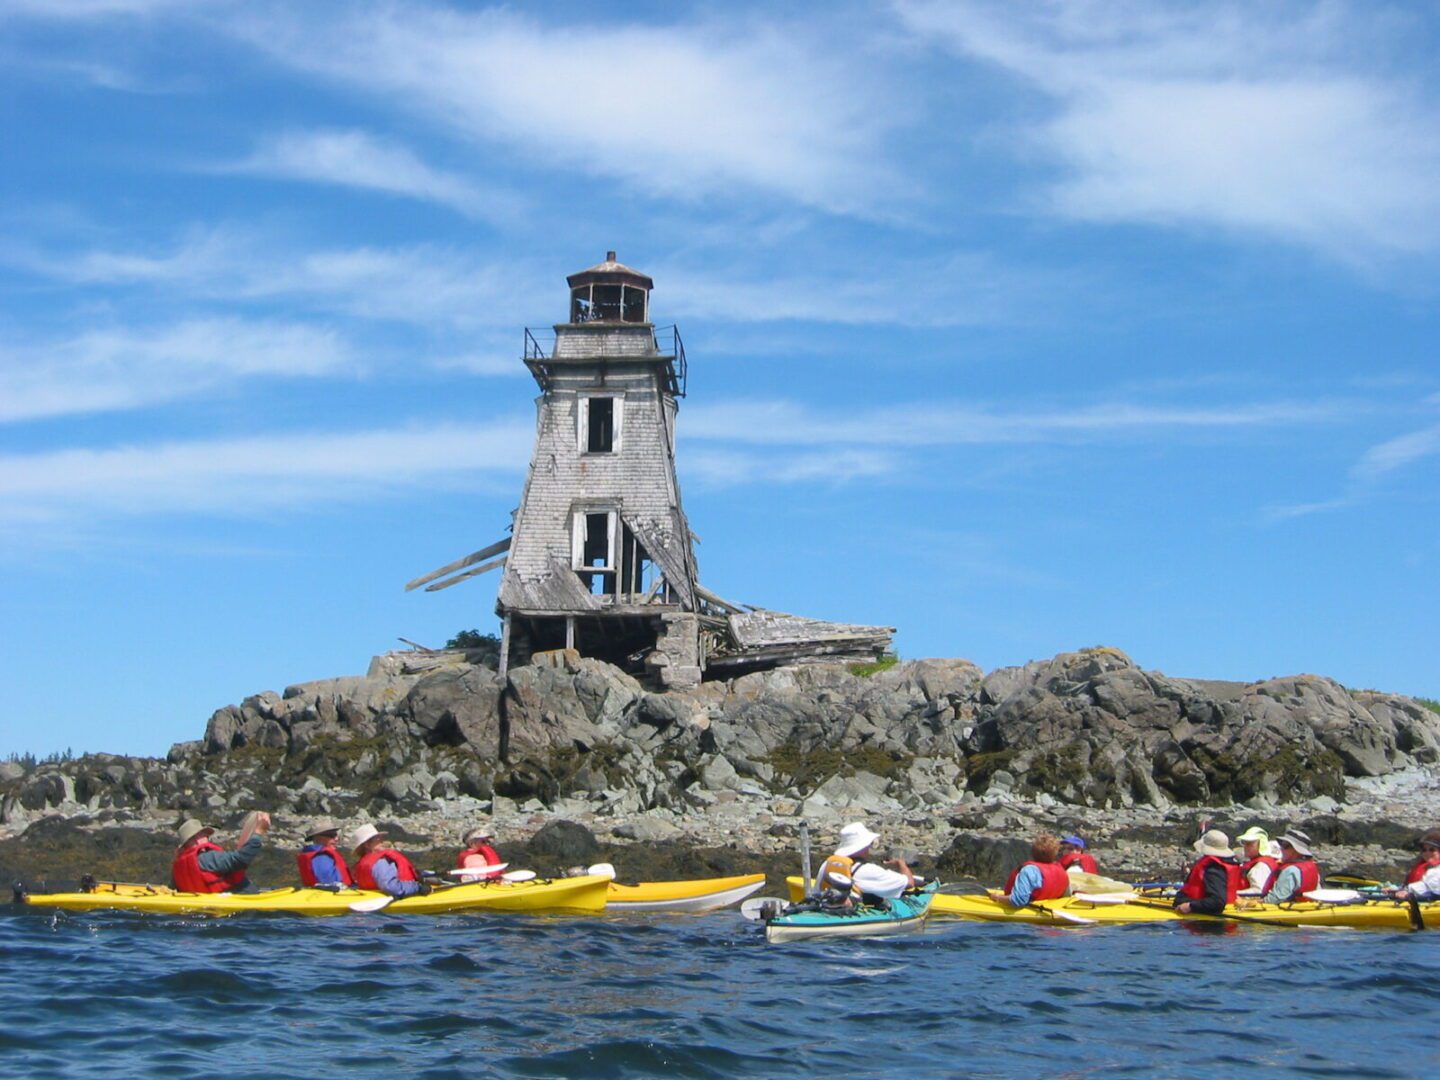 A group of people in kayaks.